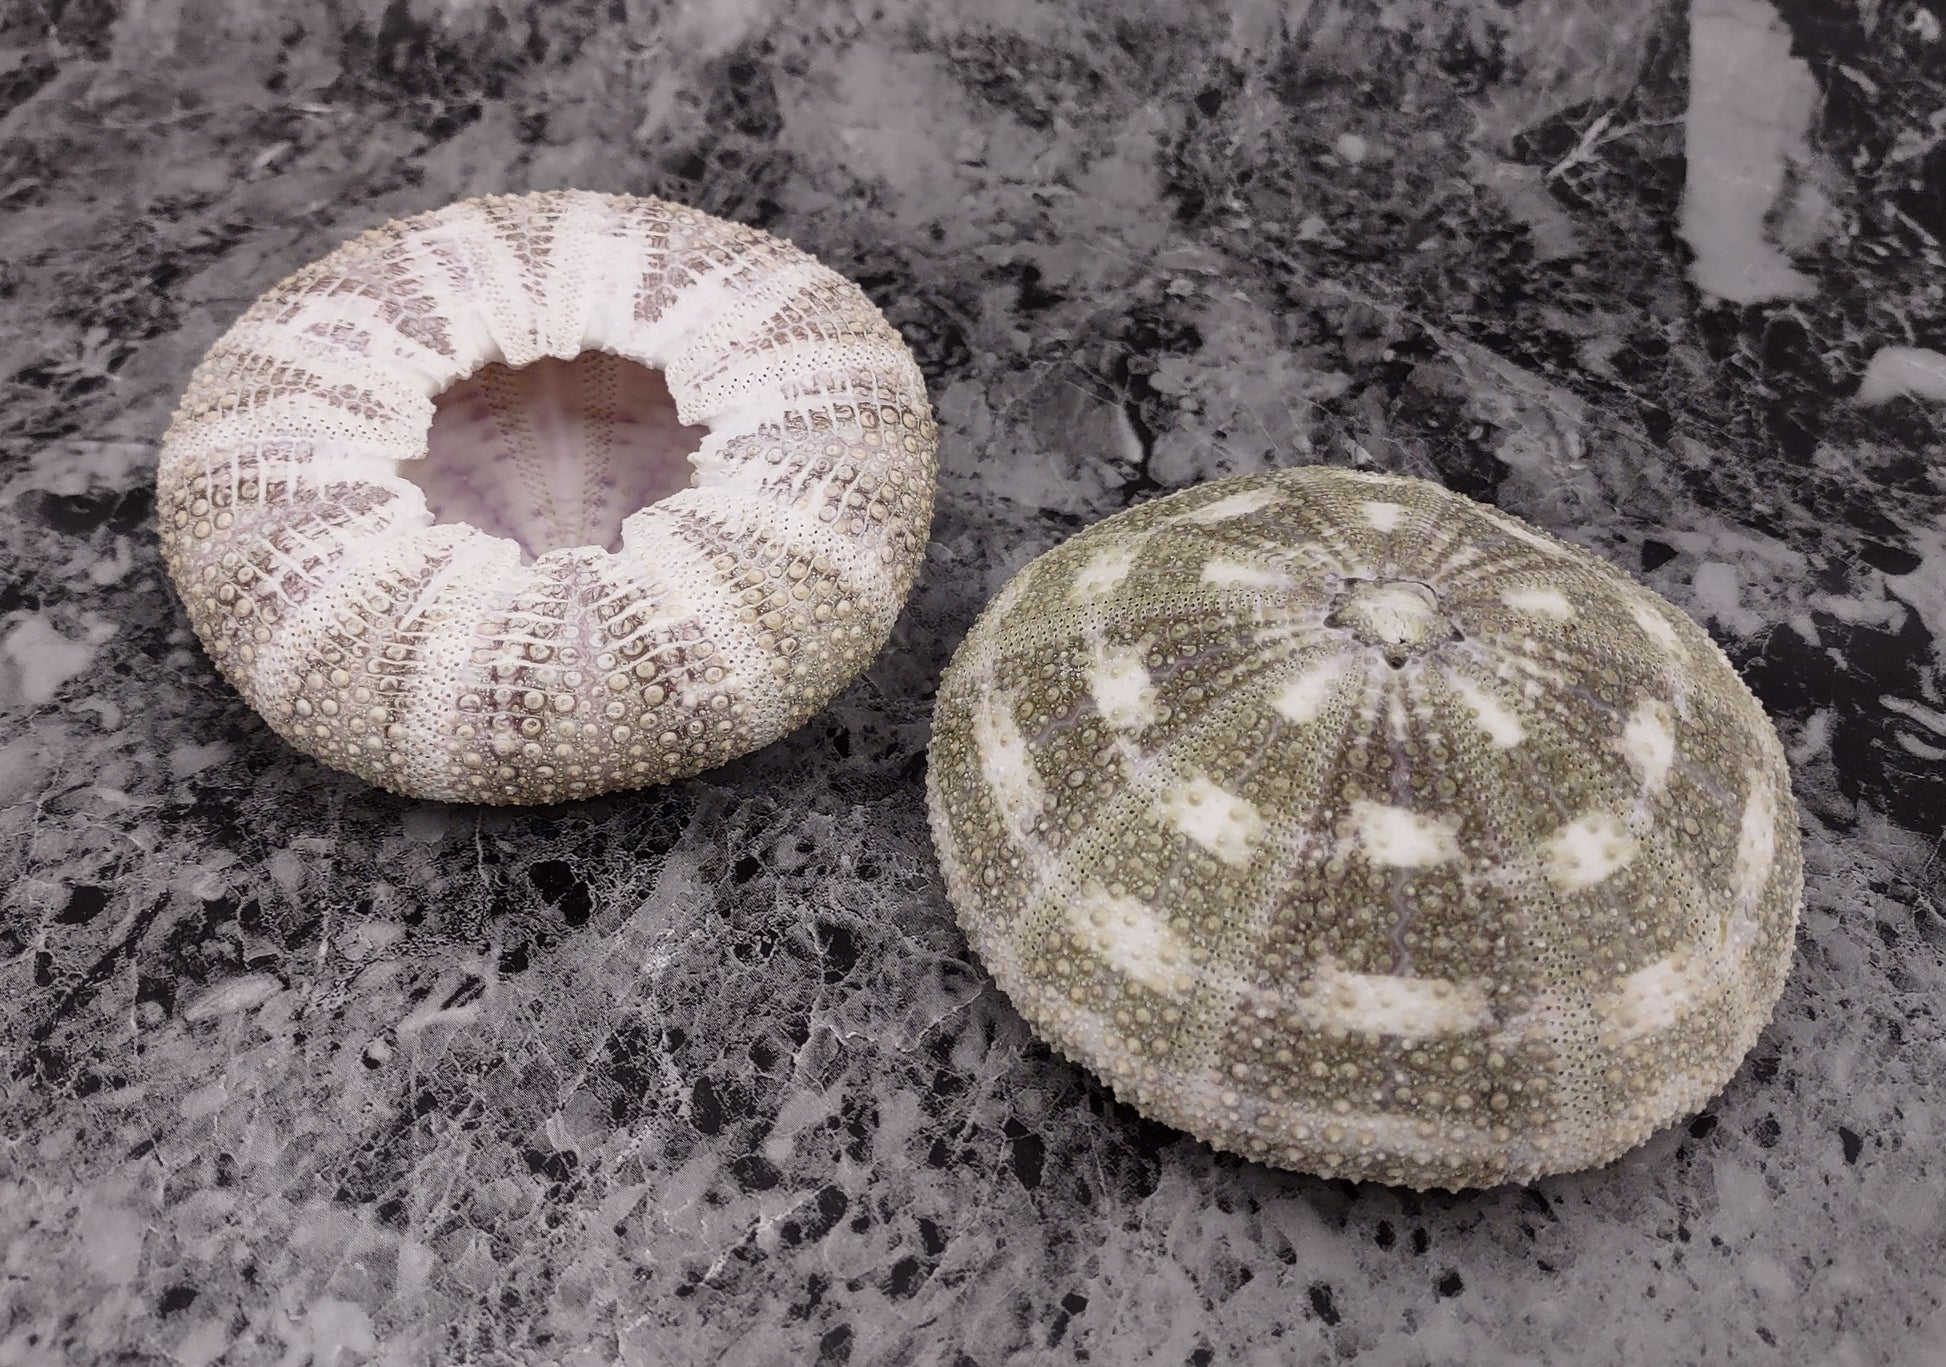 Alfonso (Gator) Sea Urchin - Toxopneustes Pileolus - (2 urchins approx. 3+ inches). Light green and brown textured shells. Copyright 2022 SeaShellSupply.com.